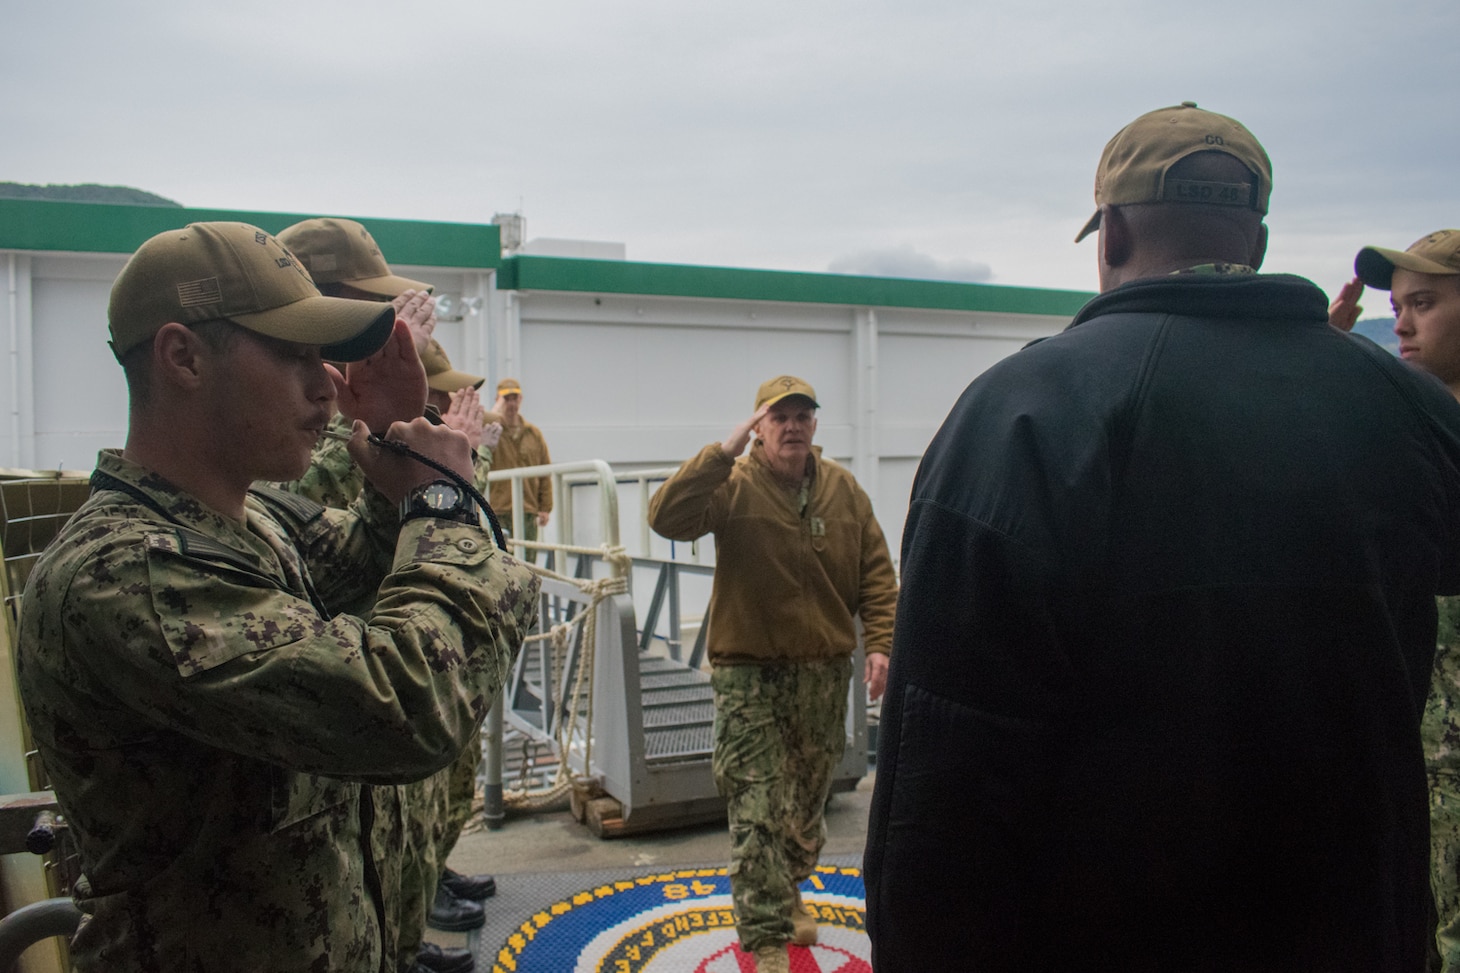 SASEBO, Japan (Jan. 9, 2019) Vice Adm. Phil Sawyer, the U.S. 7th Fleet commander, is saluted by sideboys and Cmdr. Patrick German, commanding officer of the amphibious dock landing ship USS Ashland (LSD 48), during a waterfront visit to forward deployed naval forces operating out of Fleet Activities Sasebo, Japan.